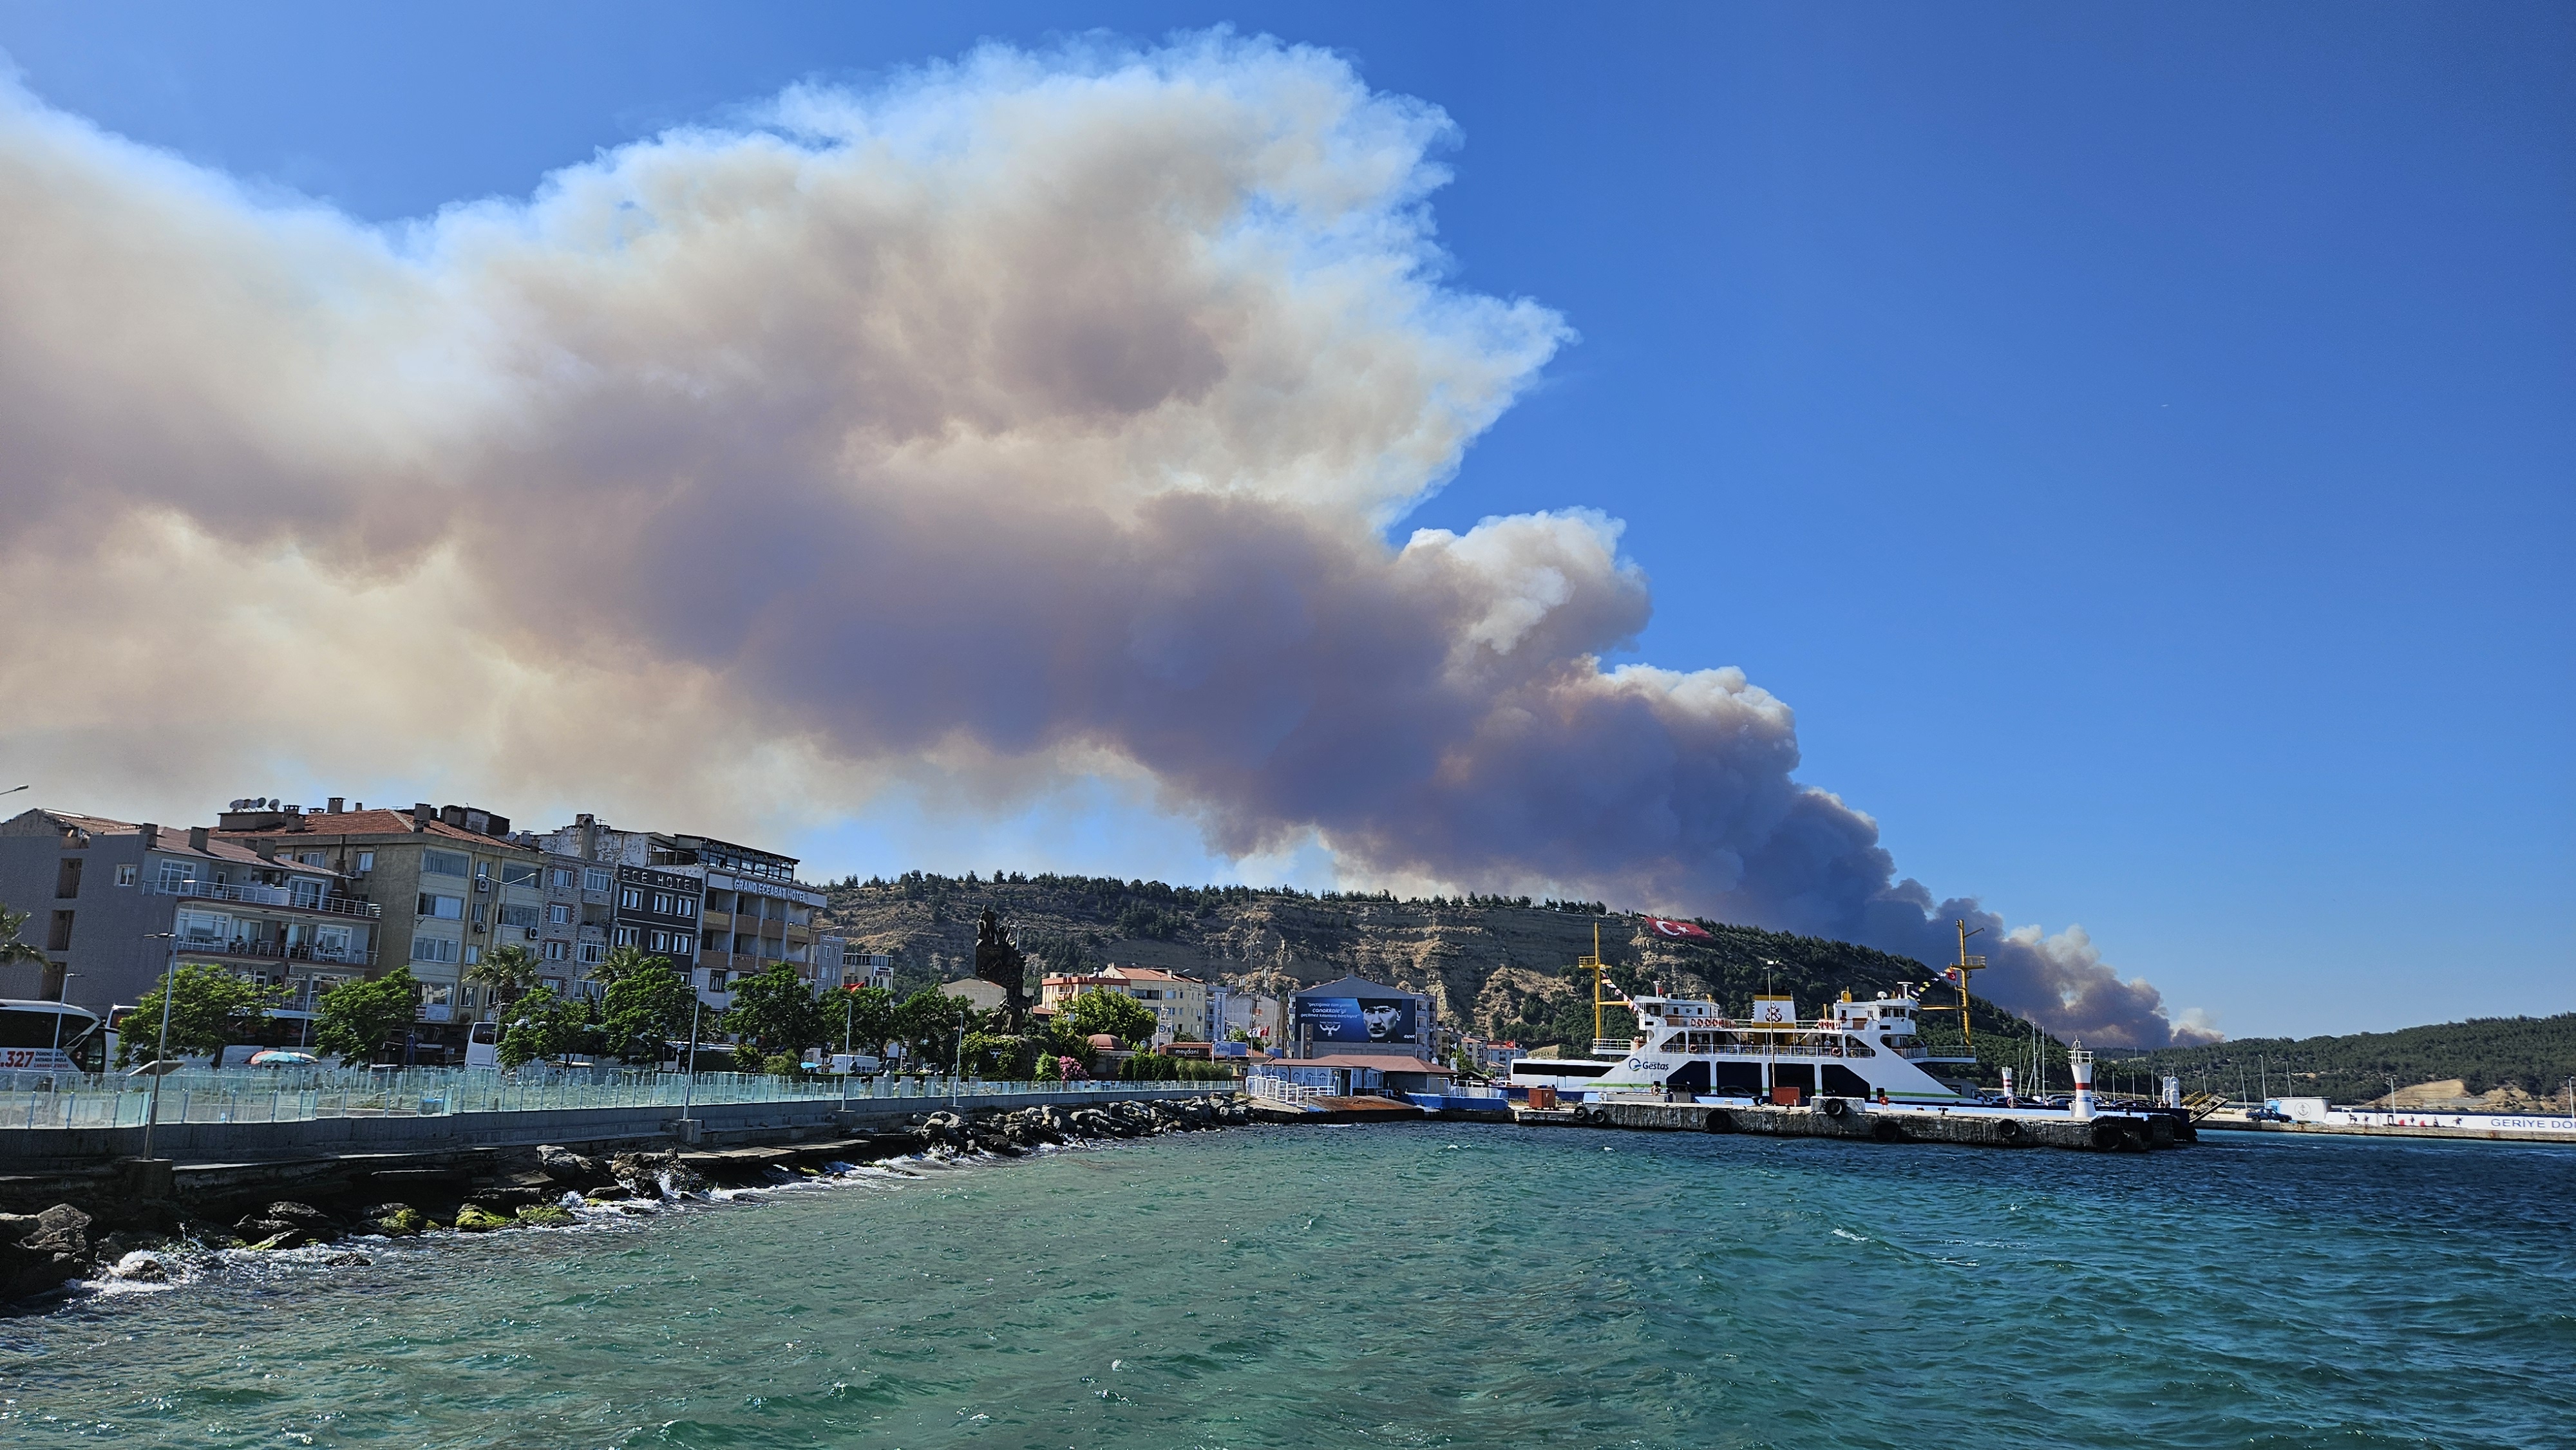 aa-20240618-34912066-34912062-oneway-ship-traffic-in-the-canakkale-strait-was-suspended-due-to-forest-fire-001.jpg